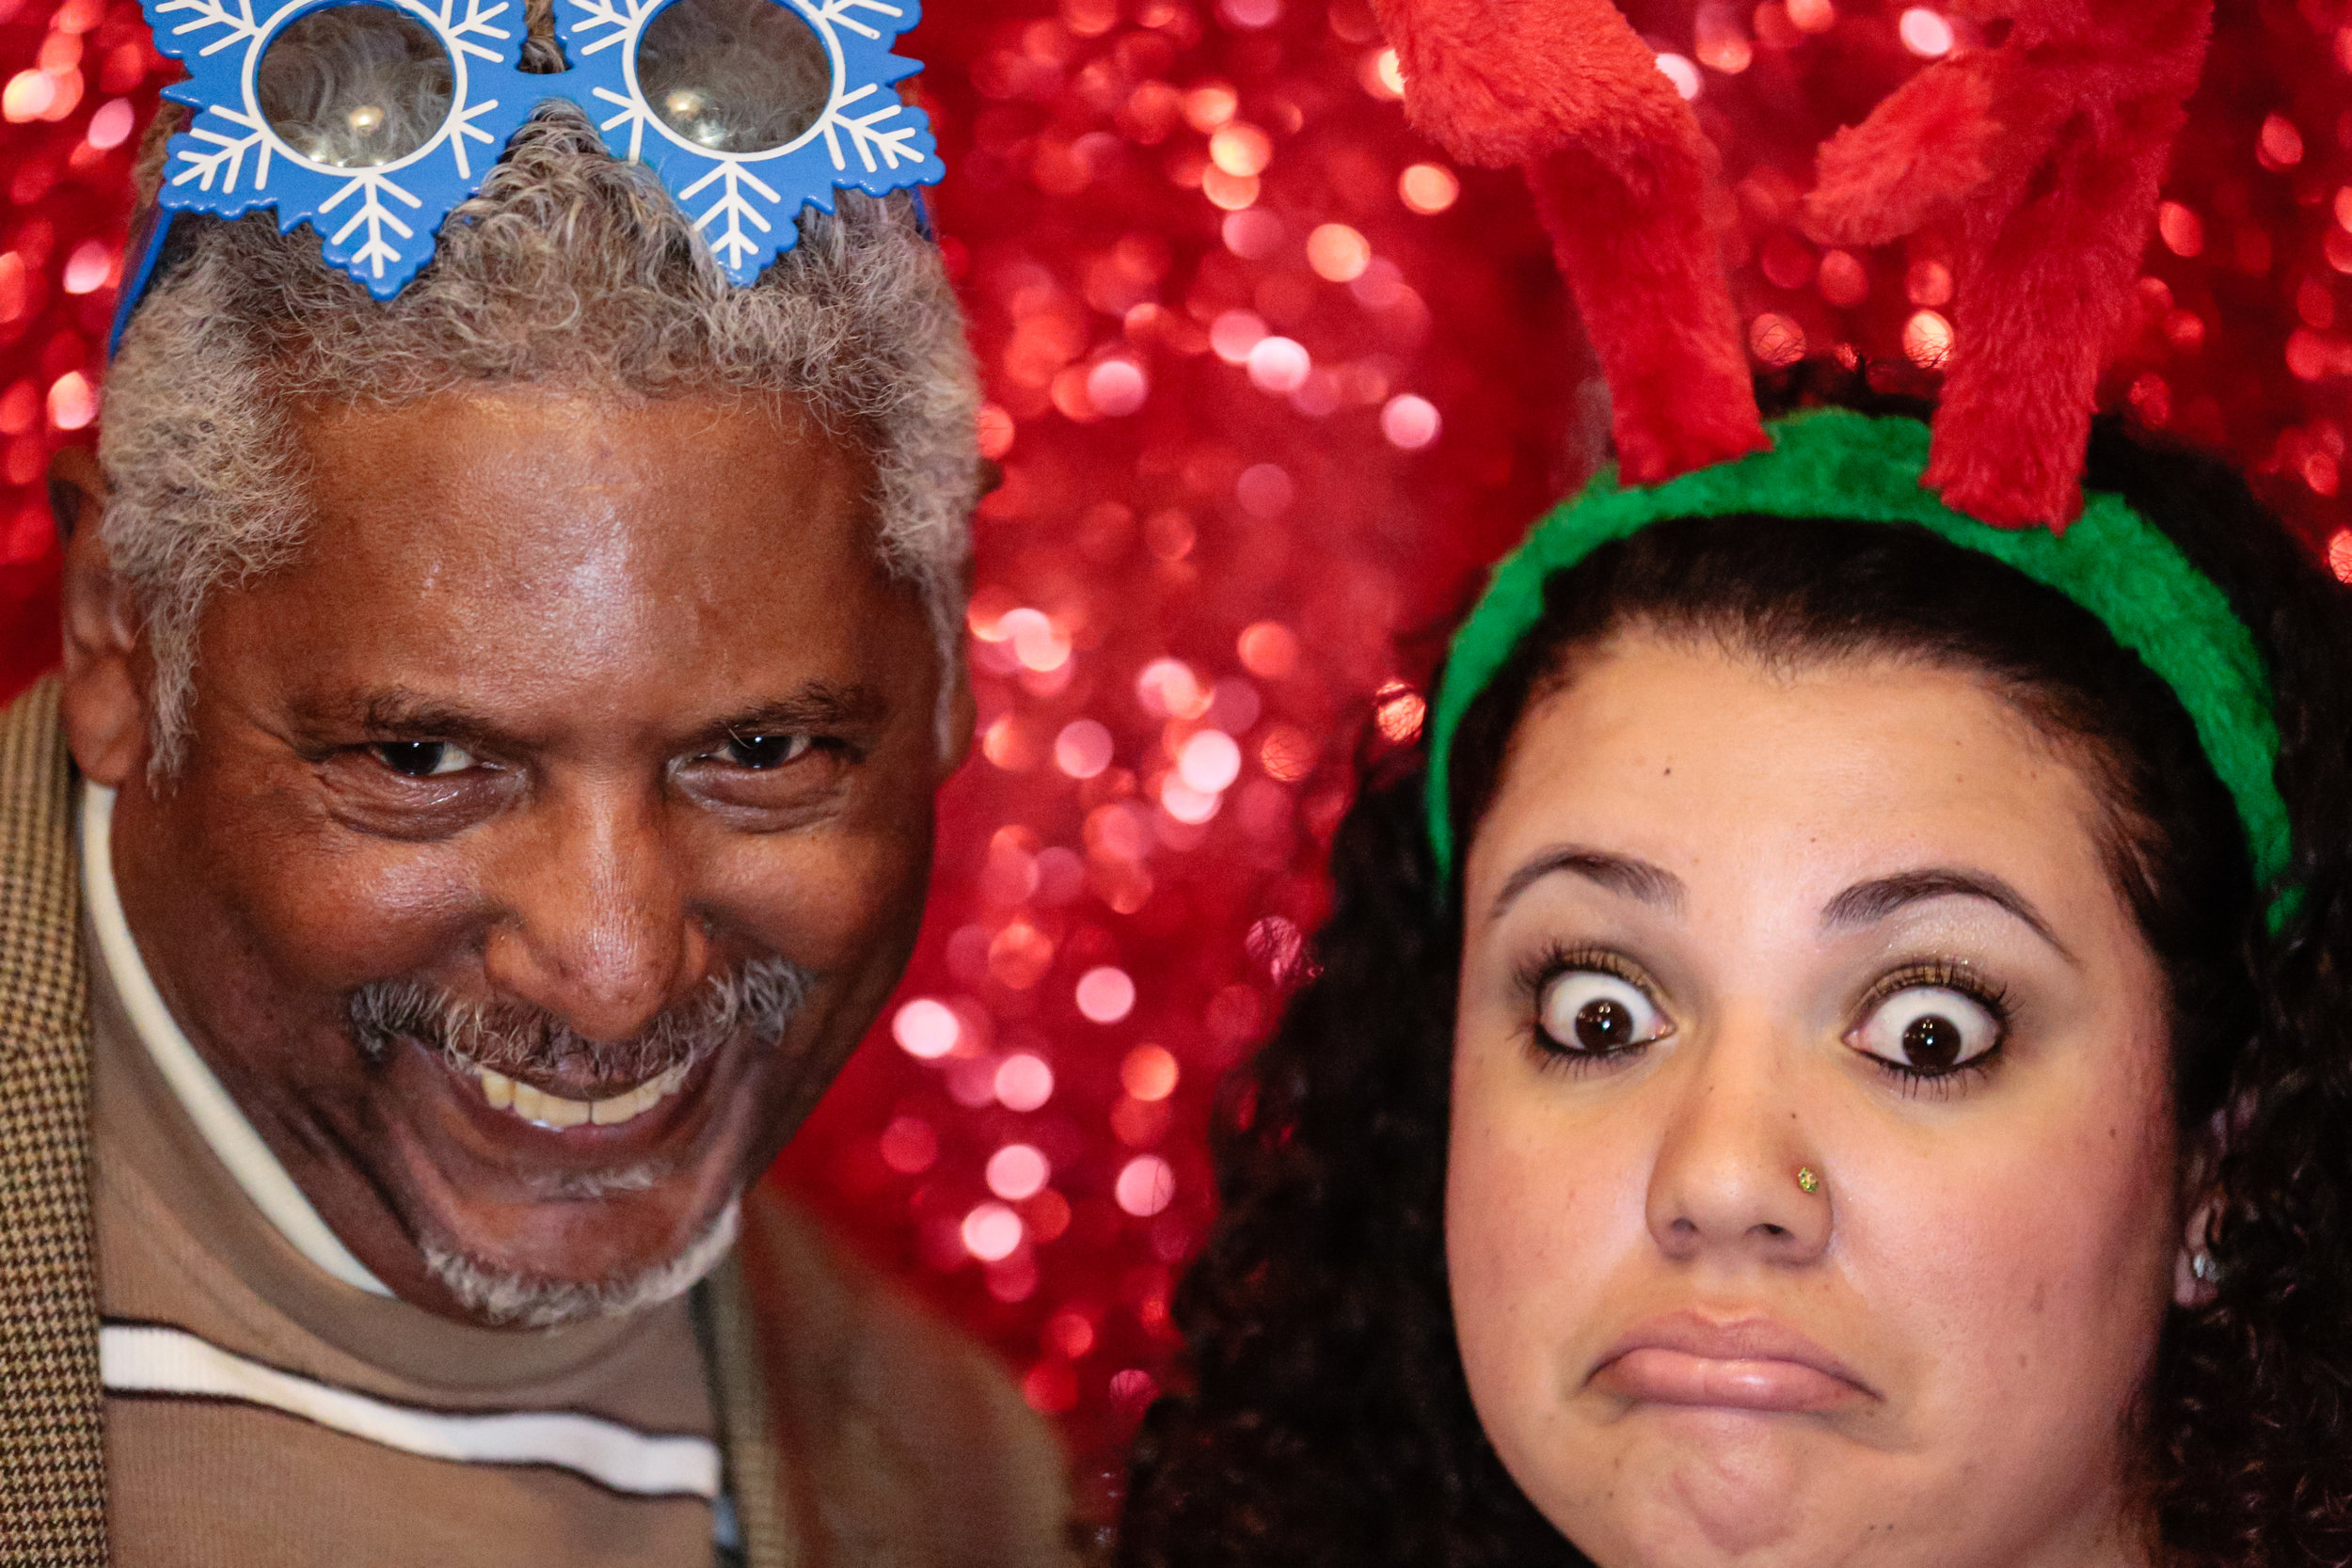 REDFIN_VA_HOLIDAY_2017_Candid_Photobooth_Images_0149.jpg